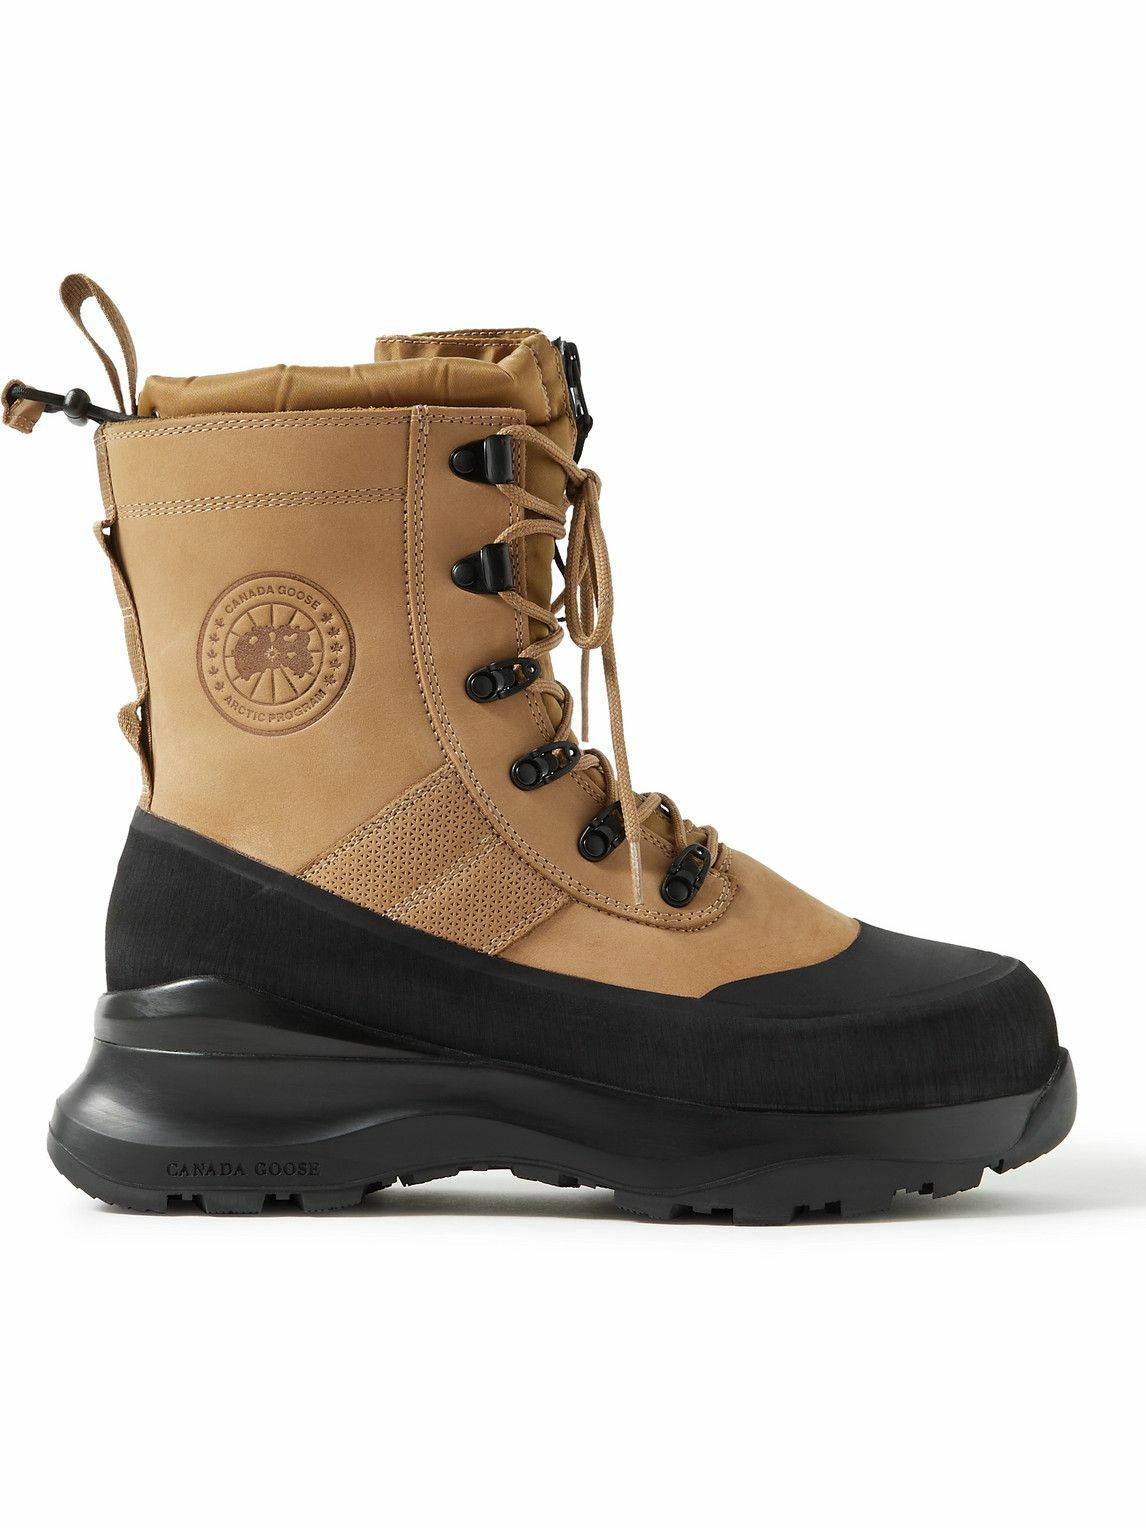 Canada Goose Armstrong RubberTrimmed Nubuck Boots Brown Canada Goose